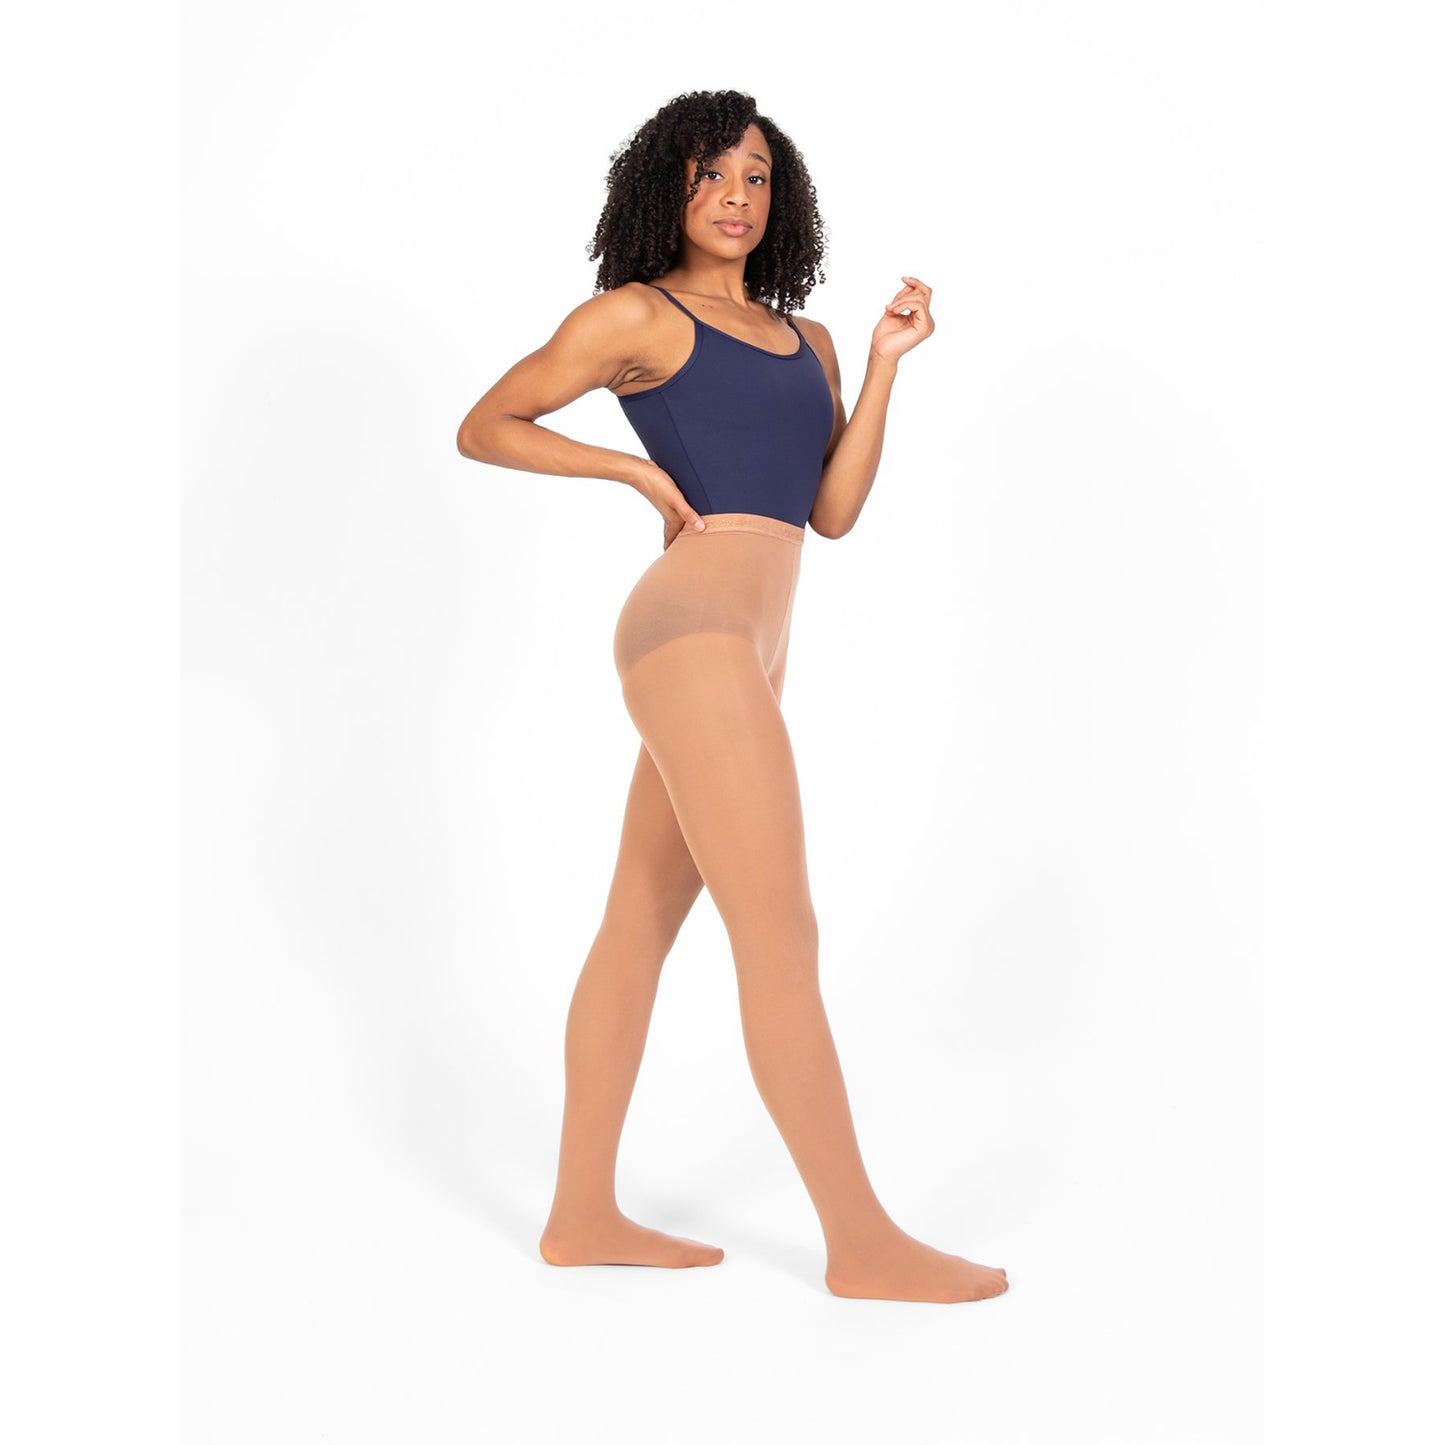 Totalstretch Seamless Footed Tights